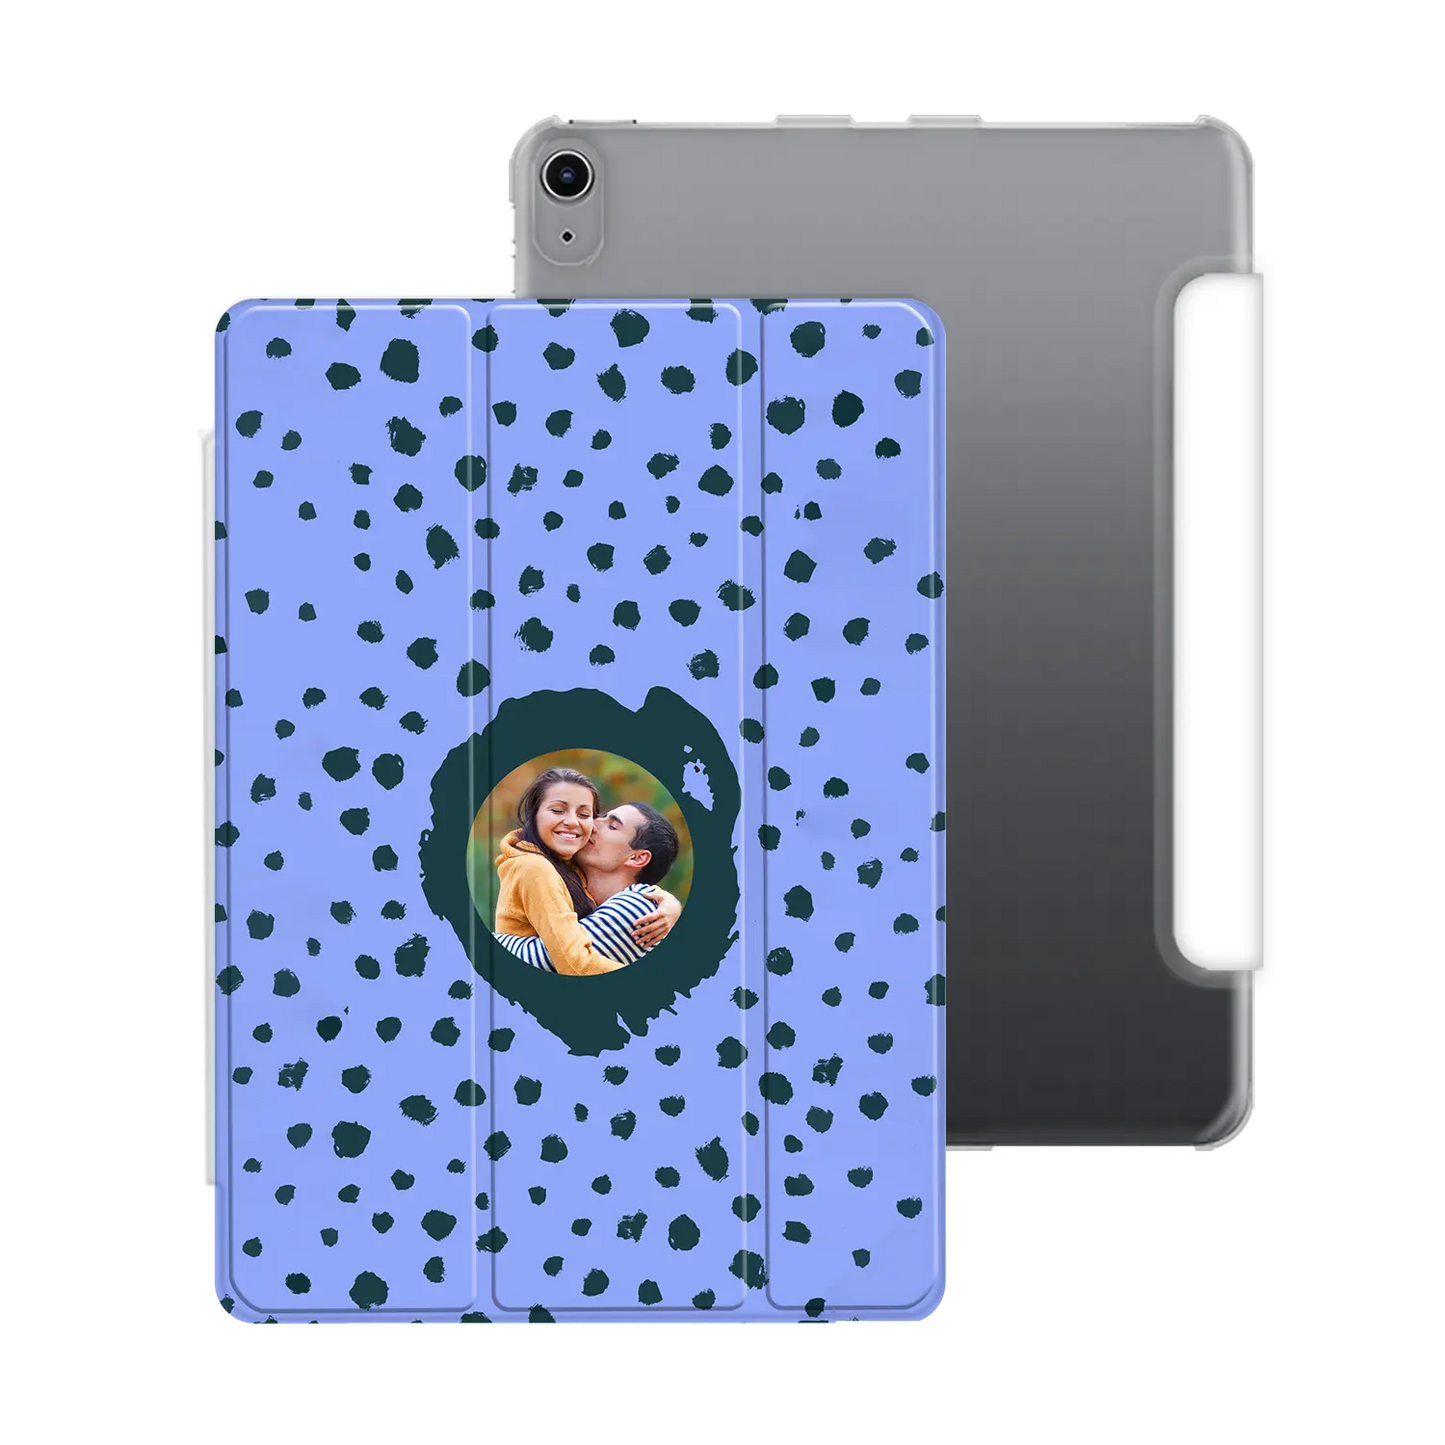 Grunge Dots Picture Style - Custom iPad Case